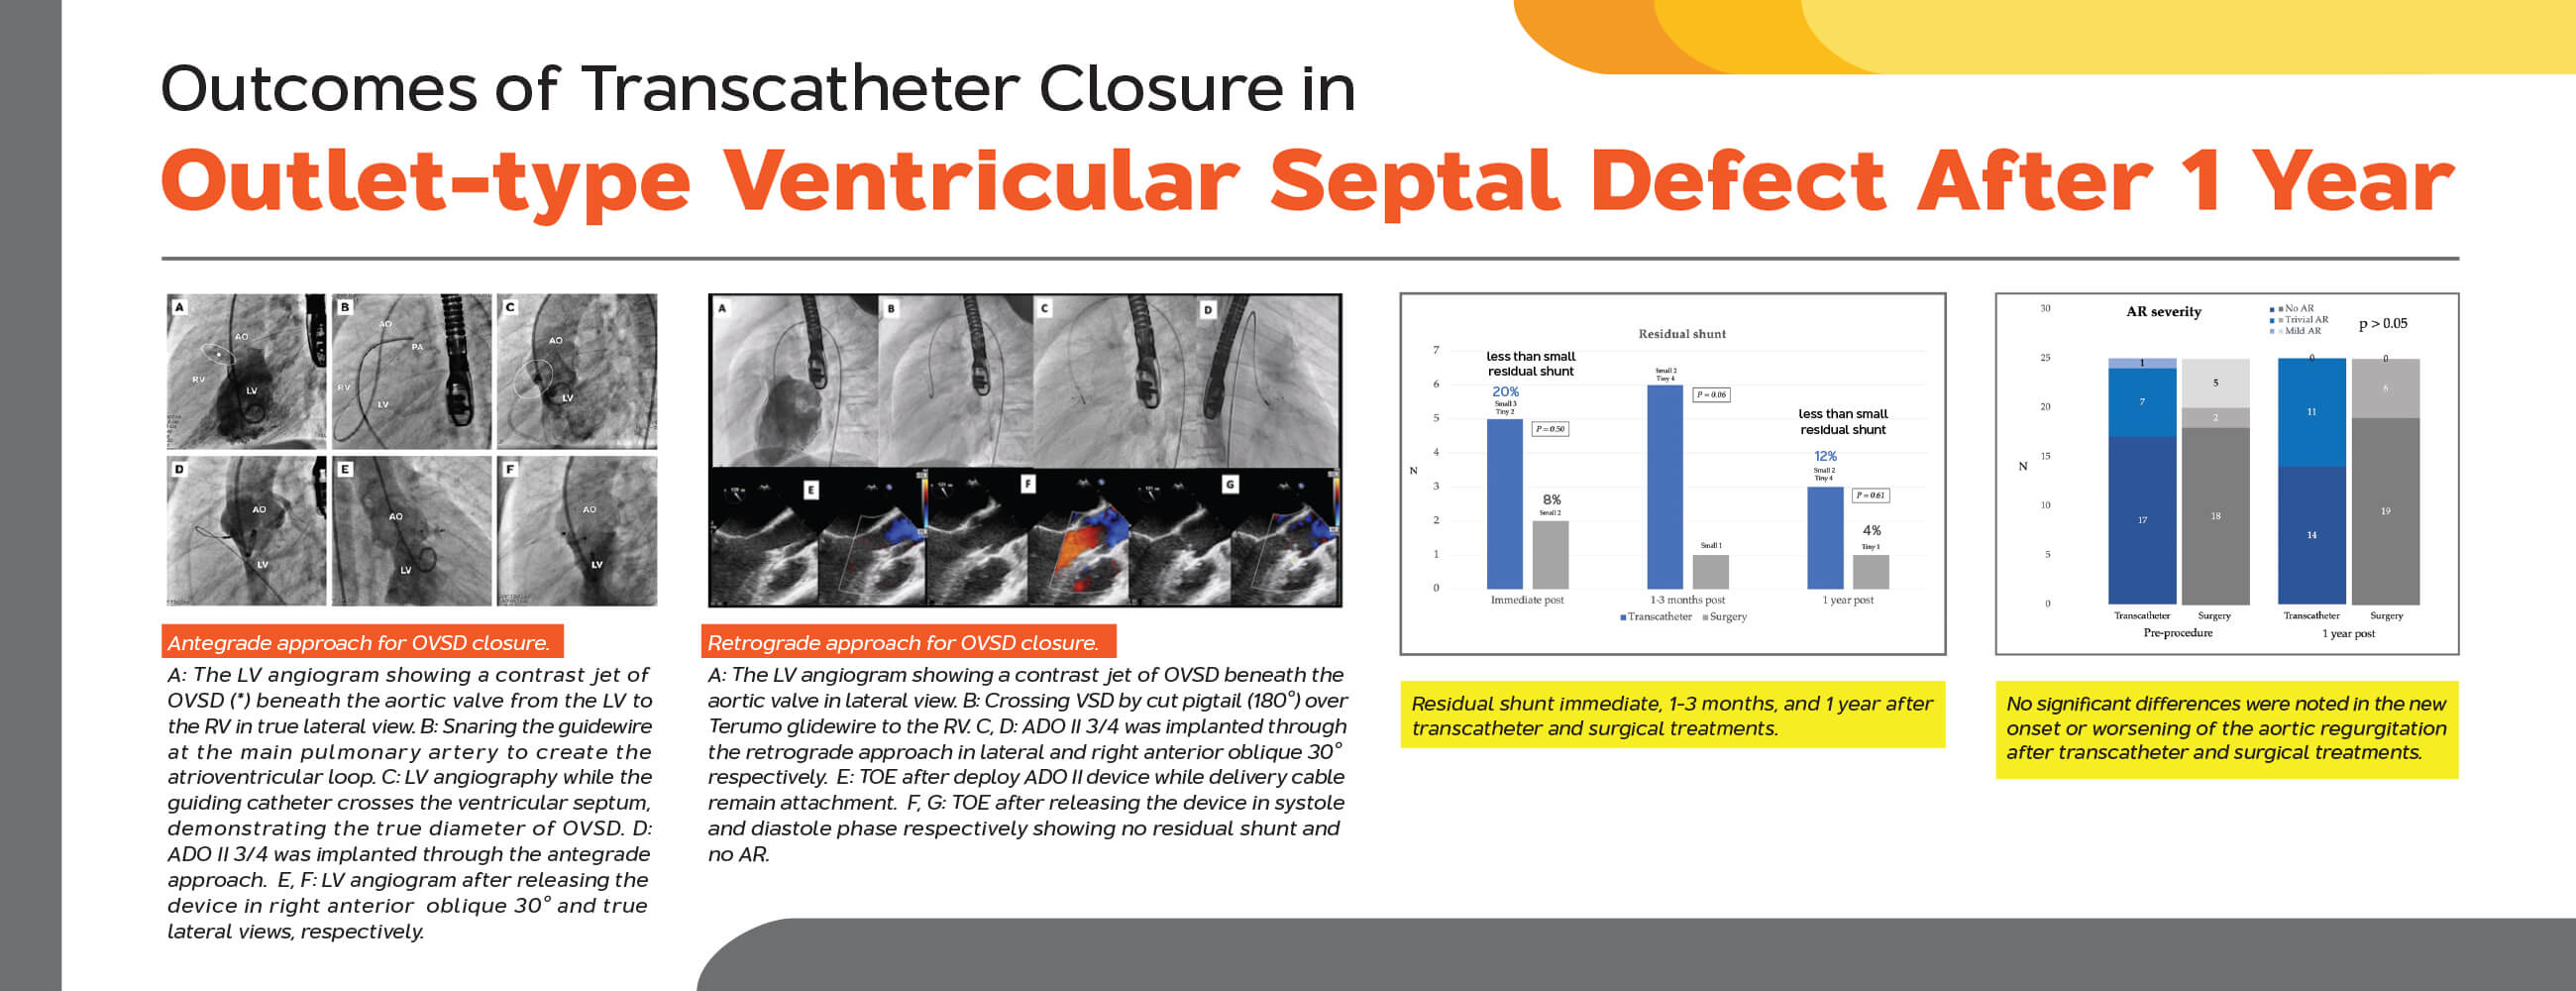 Outcomes of Transcatheter Closure in Outlet-Type Ventricular Septal Defect after 1 Year